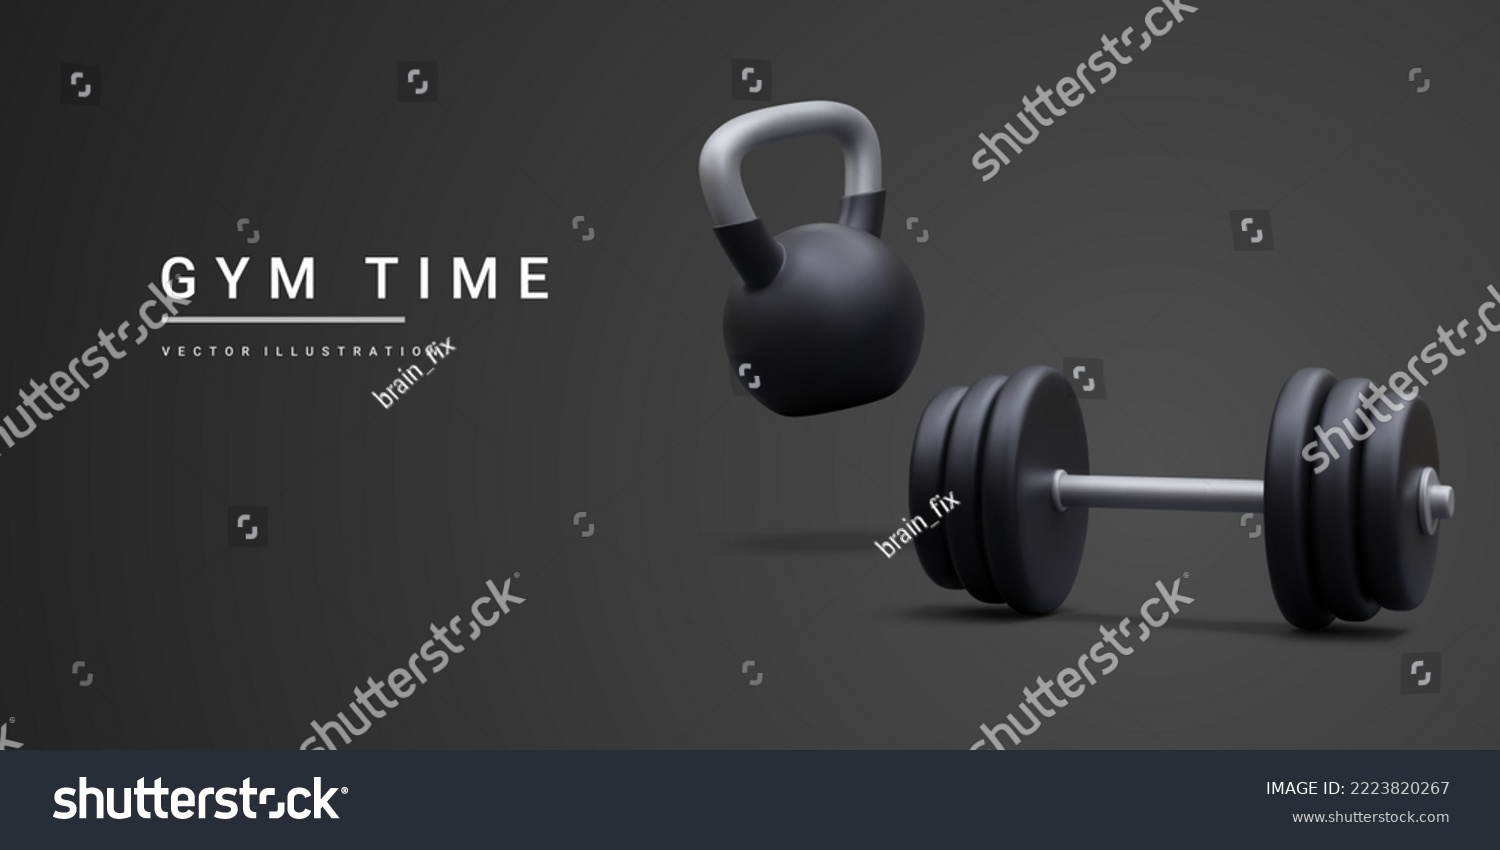 3d realistic banner with dumbbells and kettlebell isolated on black background. Vector illustration